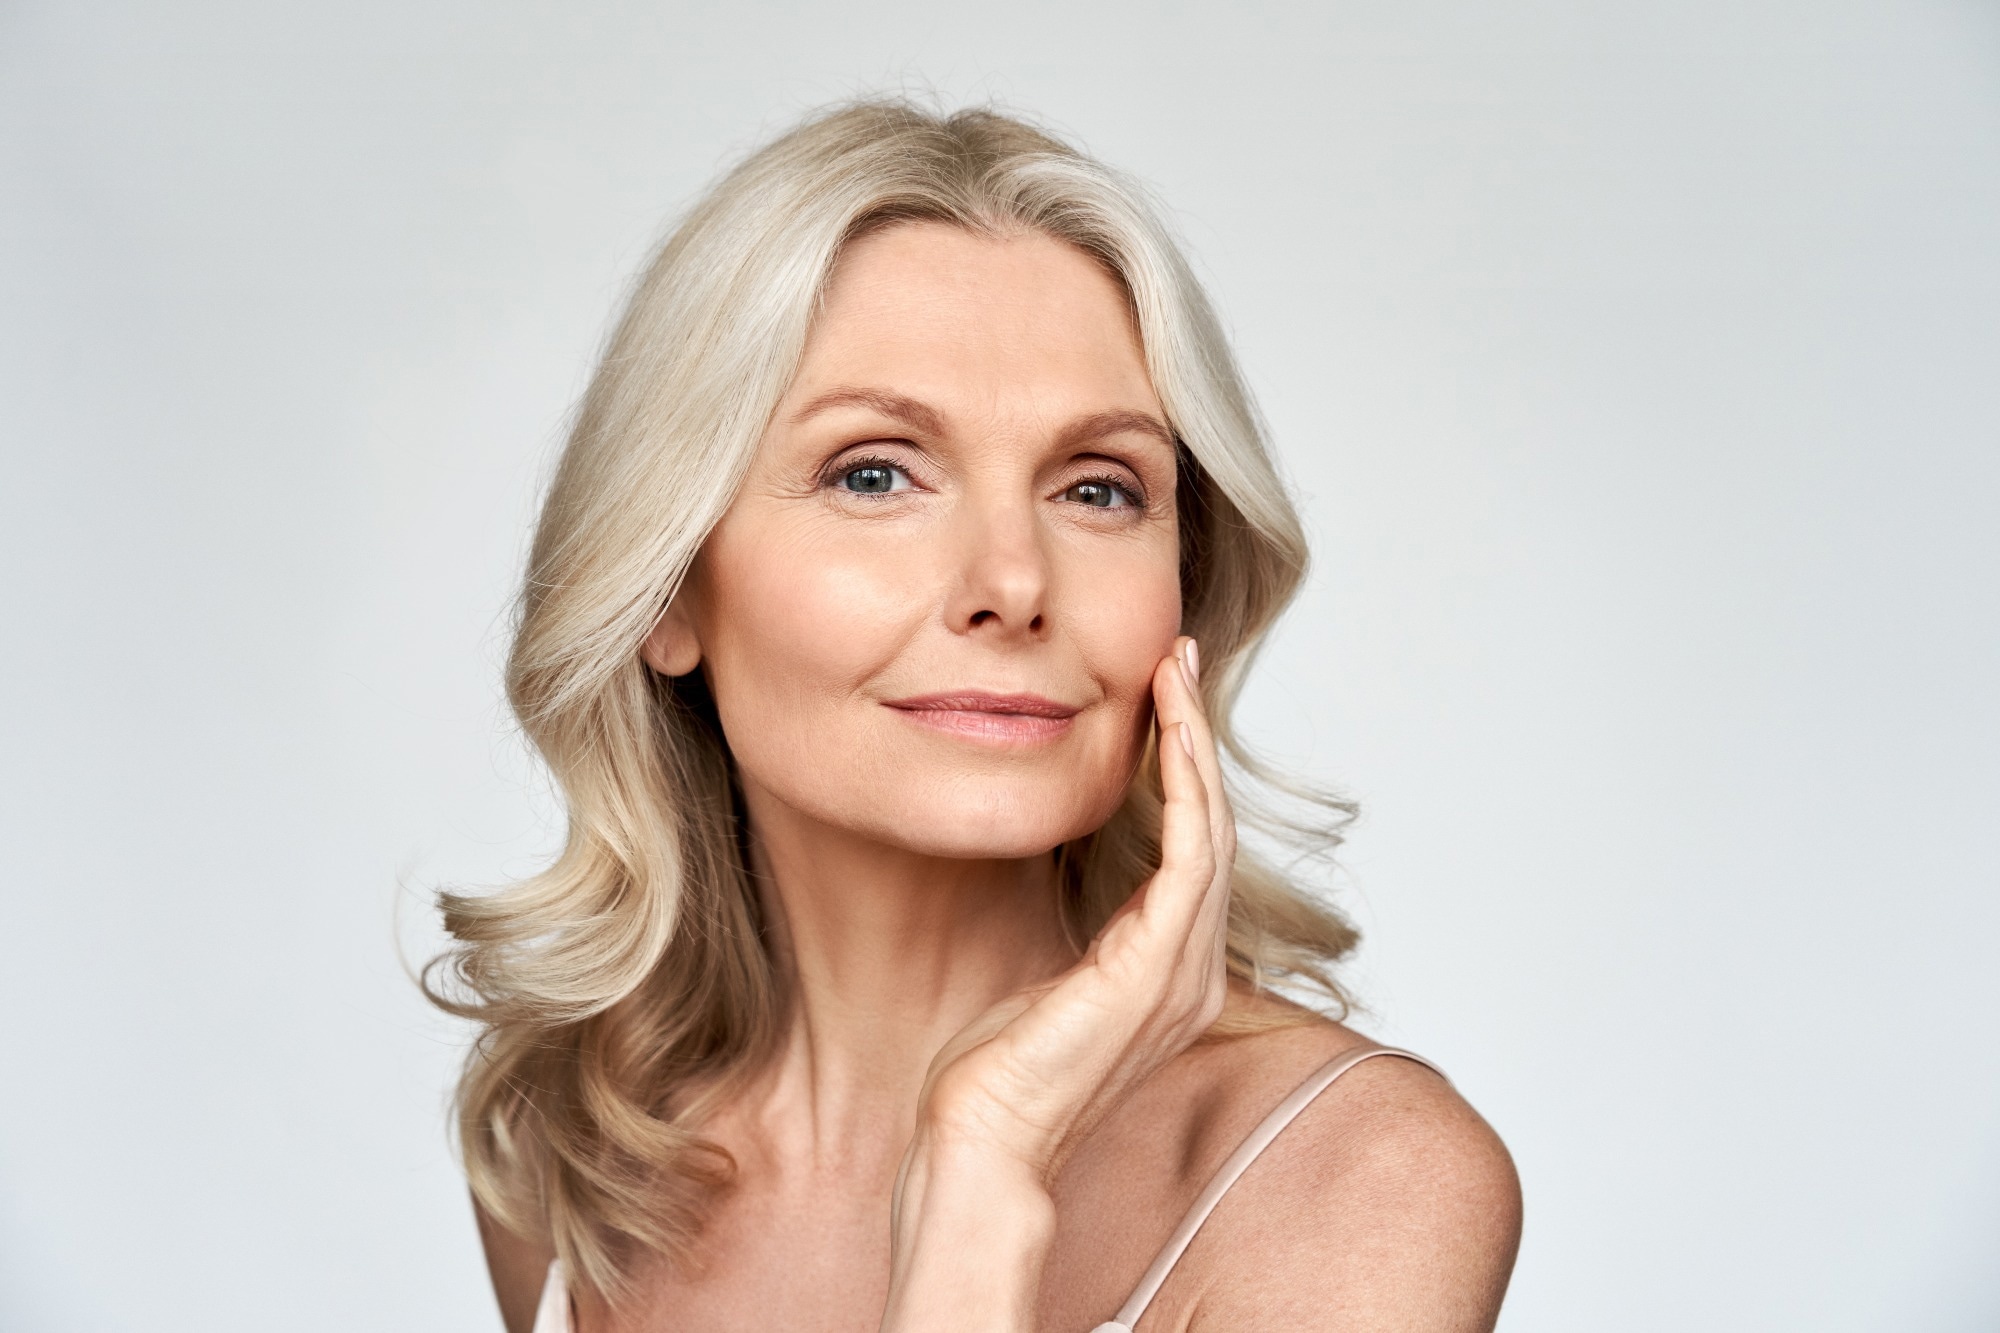 Study: An analysis of multiple studies enables the identification of potential microbial features associated with skin aging. Photo credit: Ground Picture/Shutterstock.com